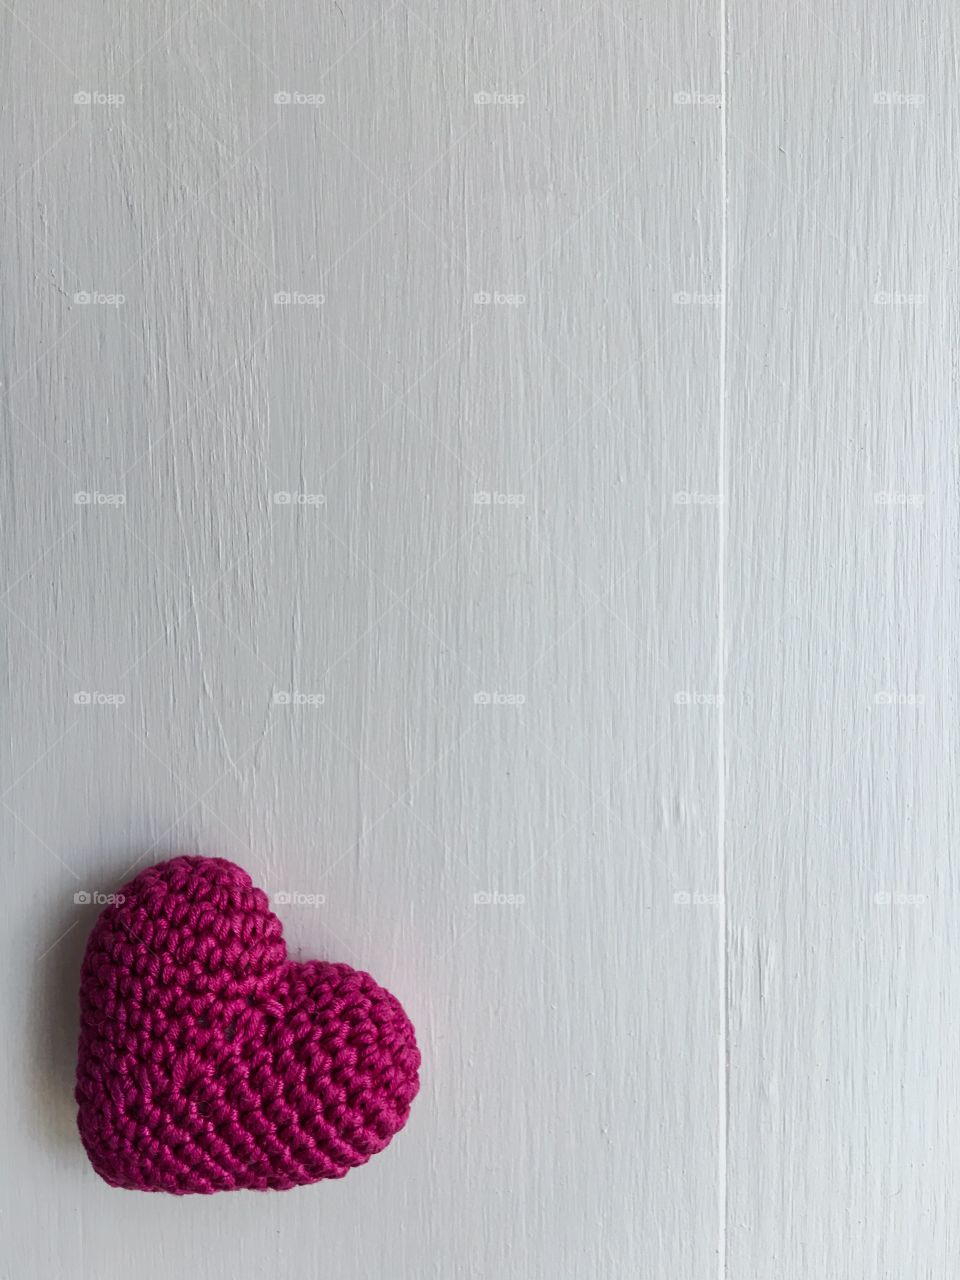 white wooden background with a knitted red heart in the corner